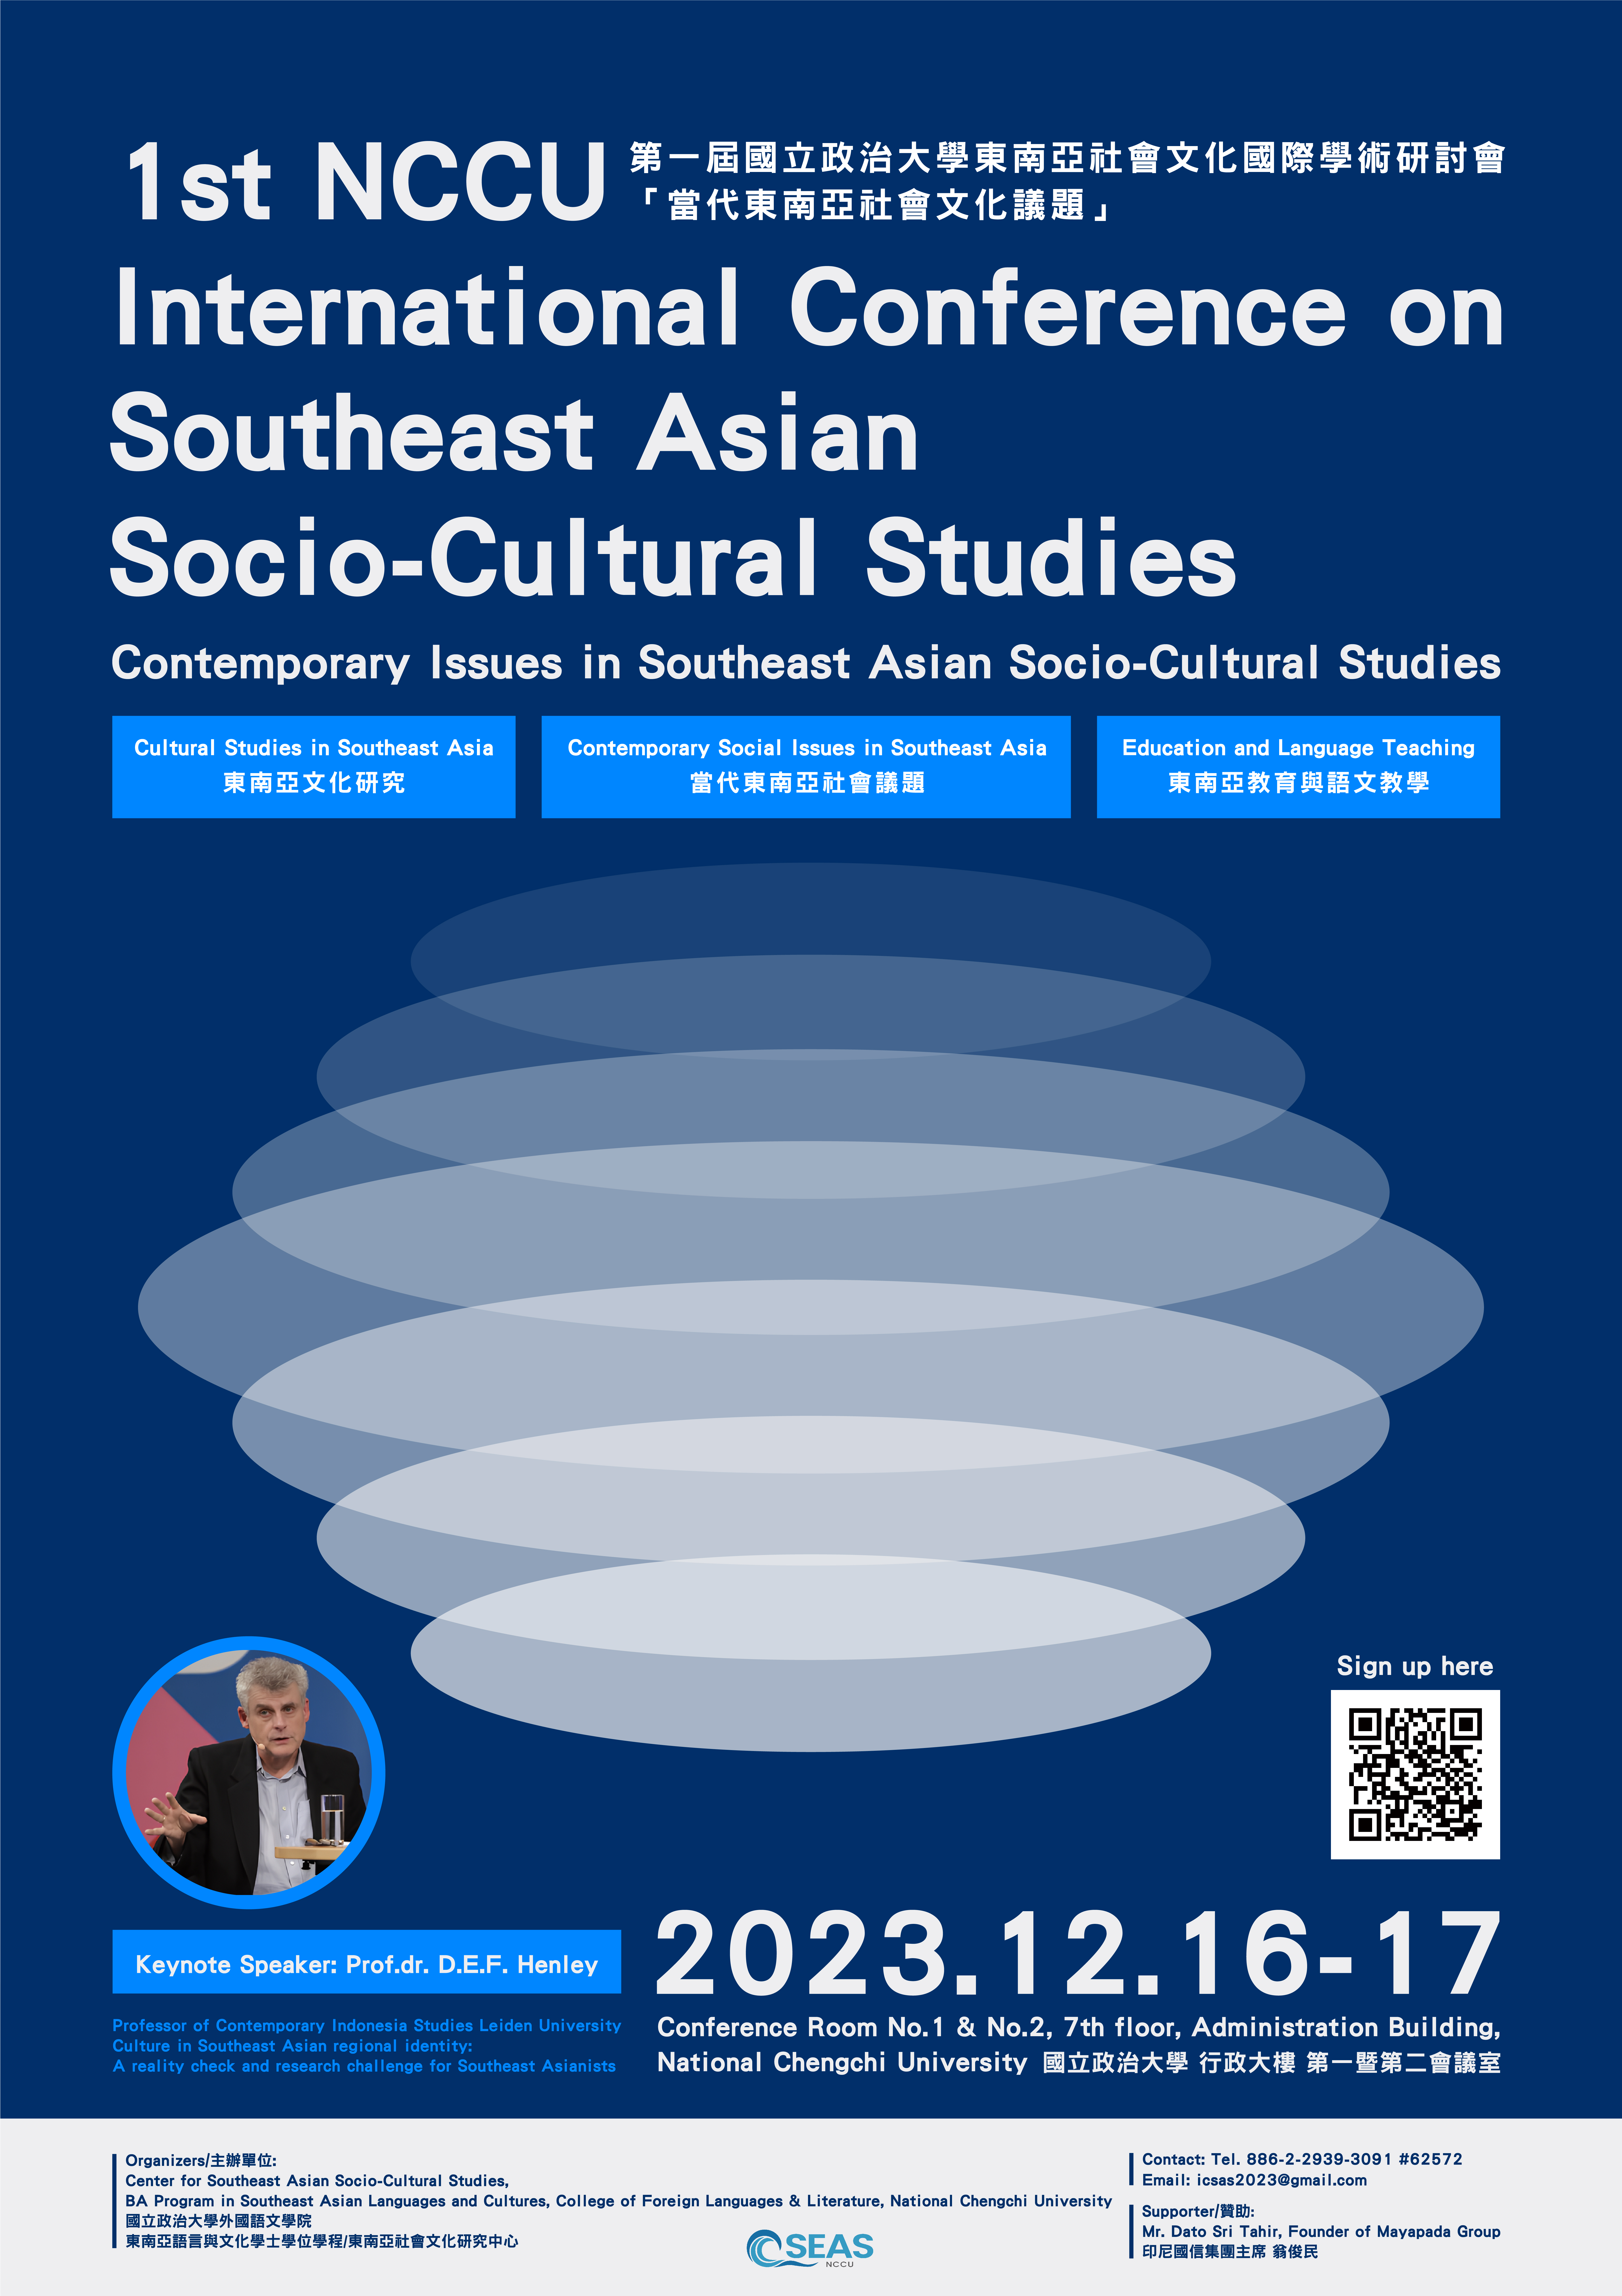 【Conference】1st NCCU International Conference on Southeast Asian Socio-Cultural Studies